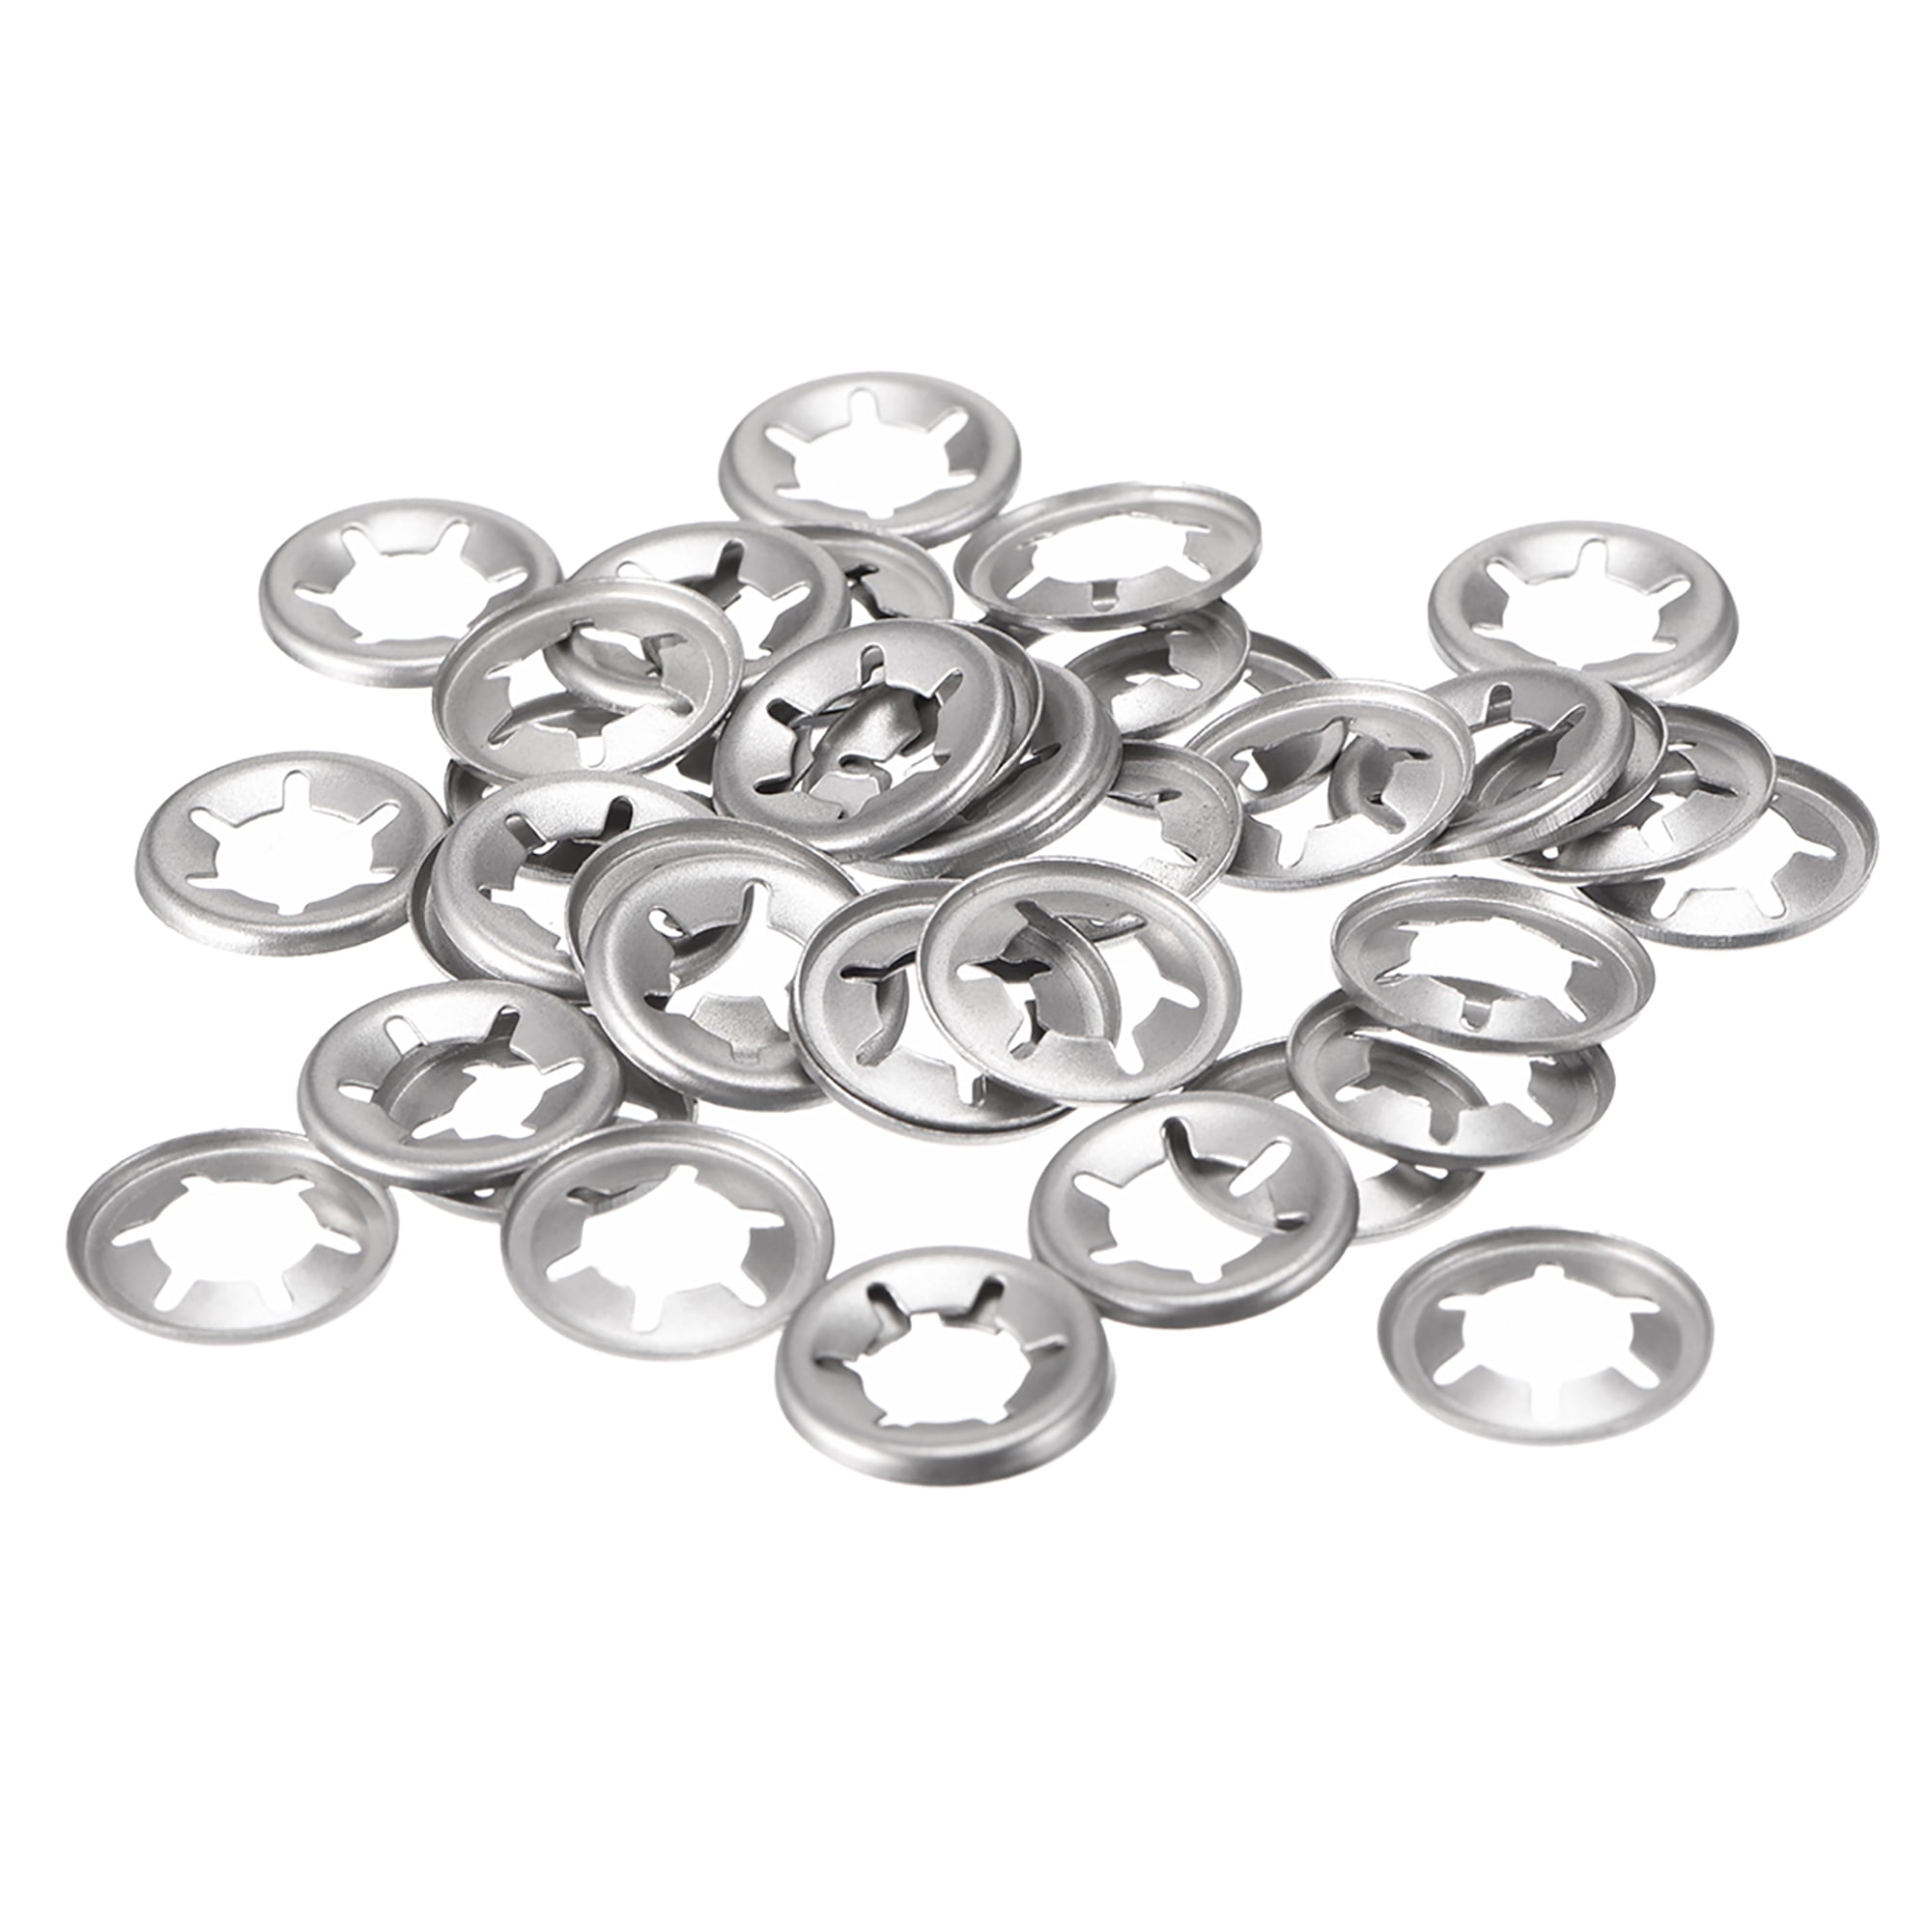 Stainless Steel 50pcs 12mm O.D M5 Internal Tooth Starlock Washer 4.6mm I.D 